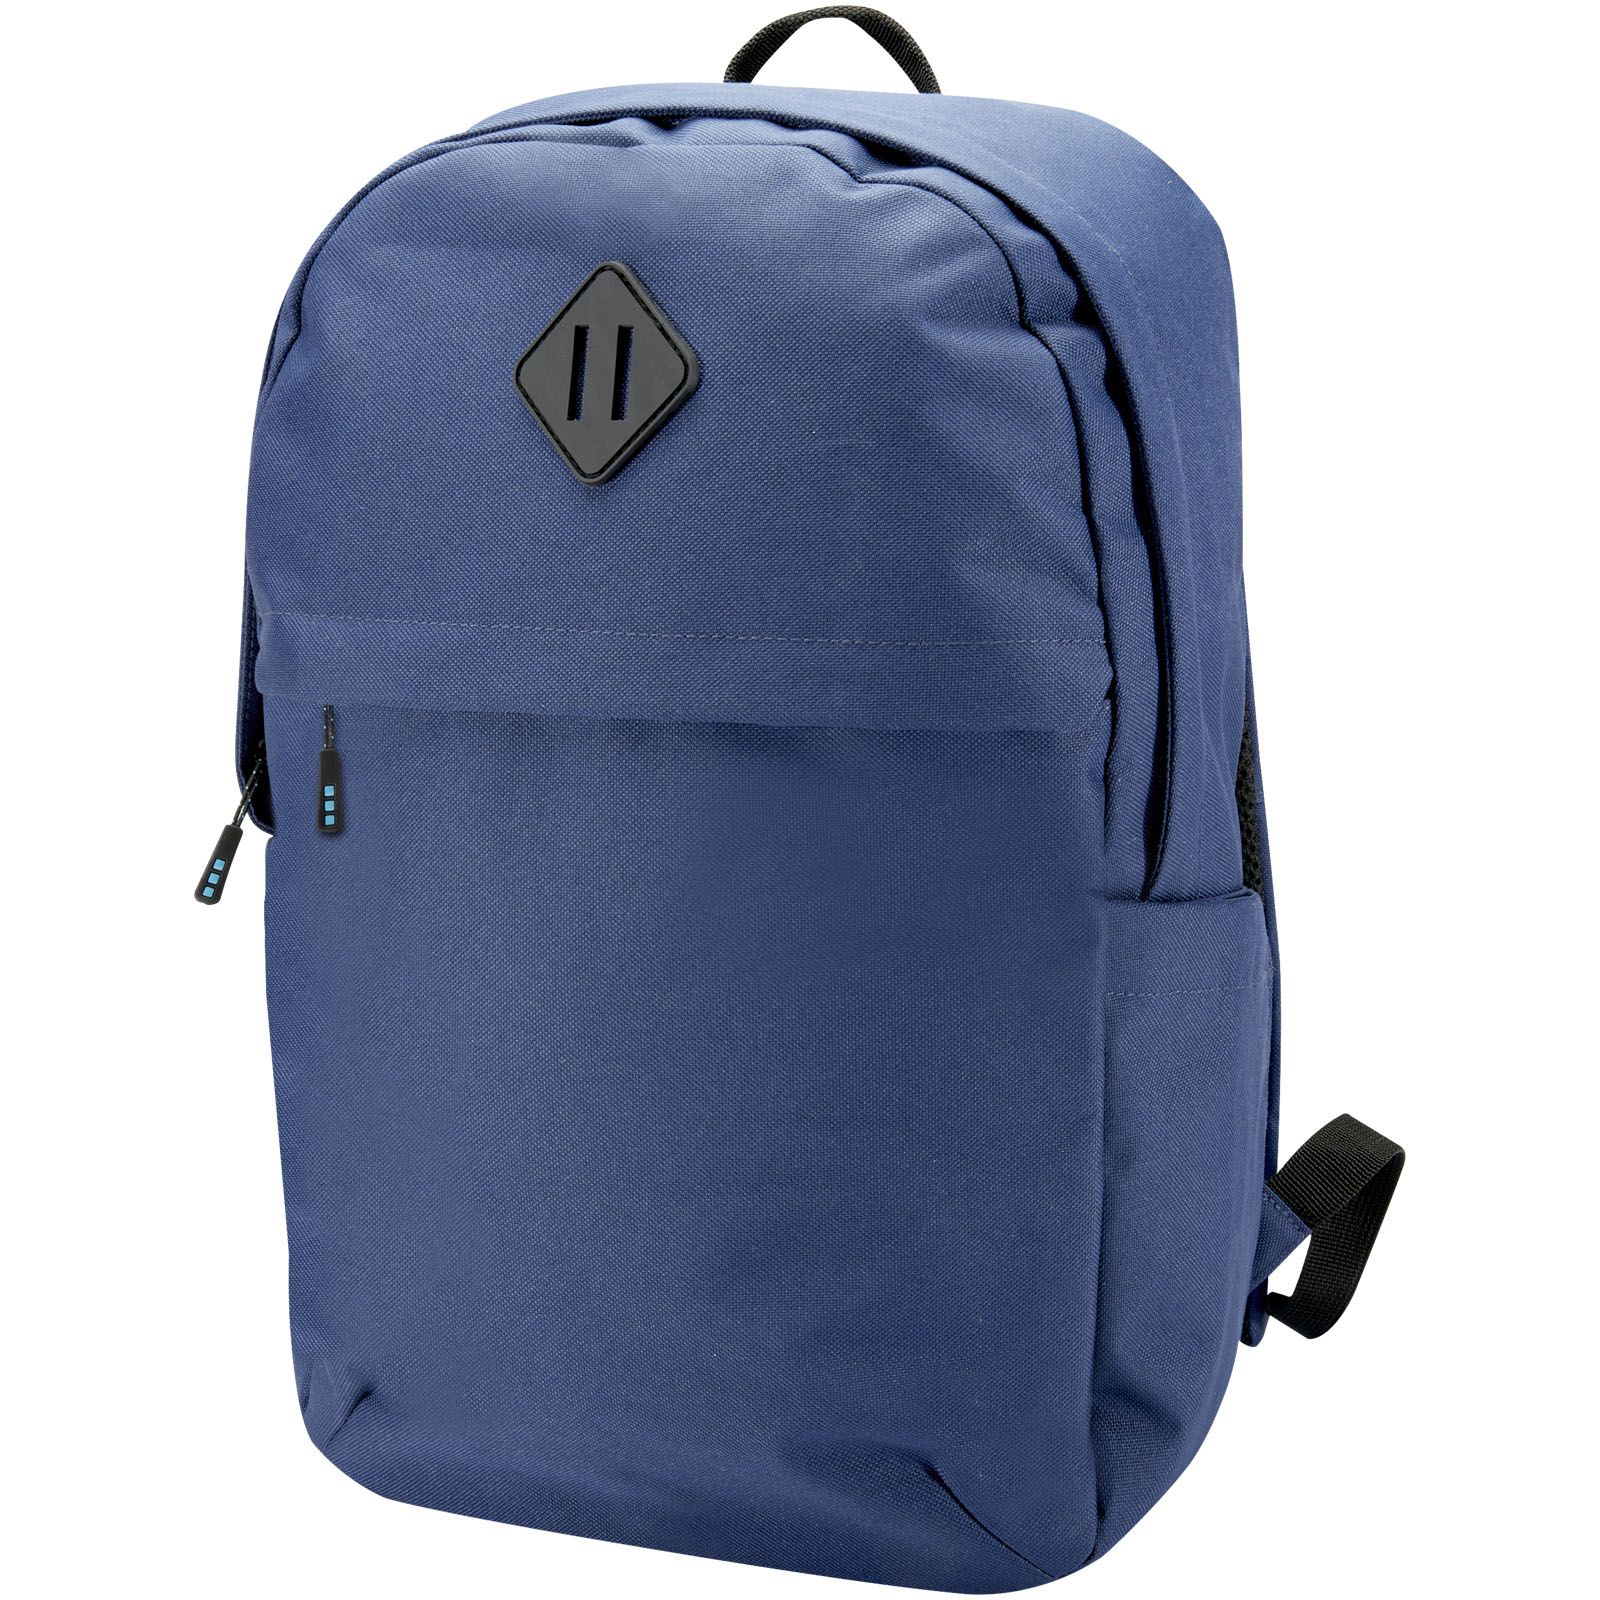 REPREVE® Our Ocean™ 15' Laptop Backpack for Commuters - Nutfield